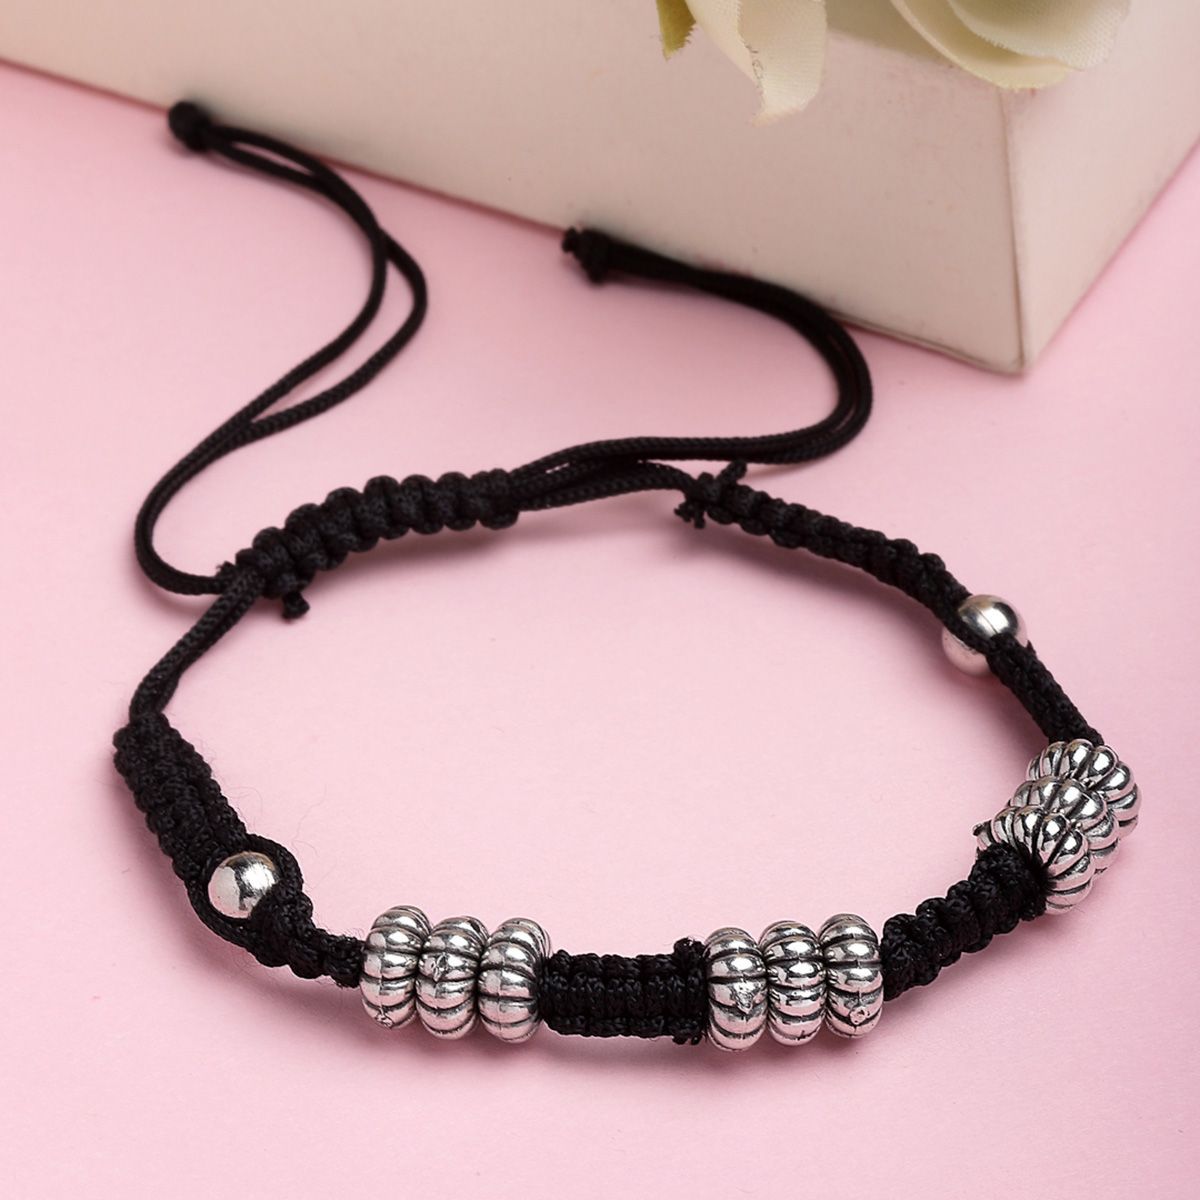 PANASH Oxidized Silver Toned Handcrafted Thread Bracelet Cum Anklet